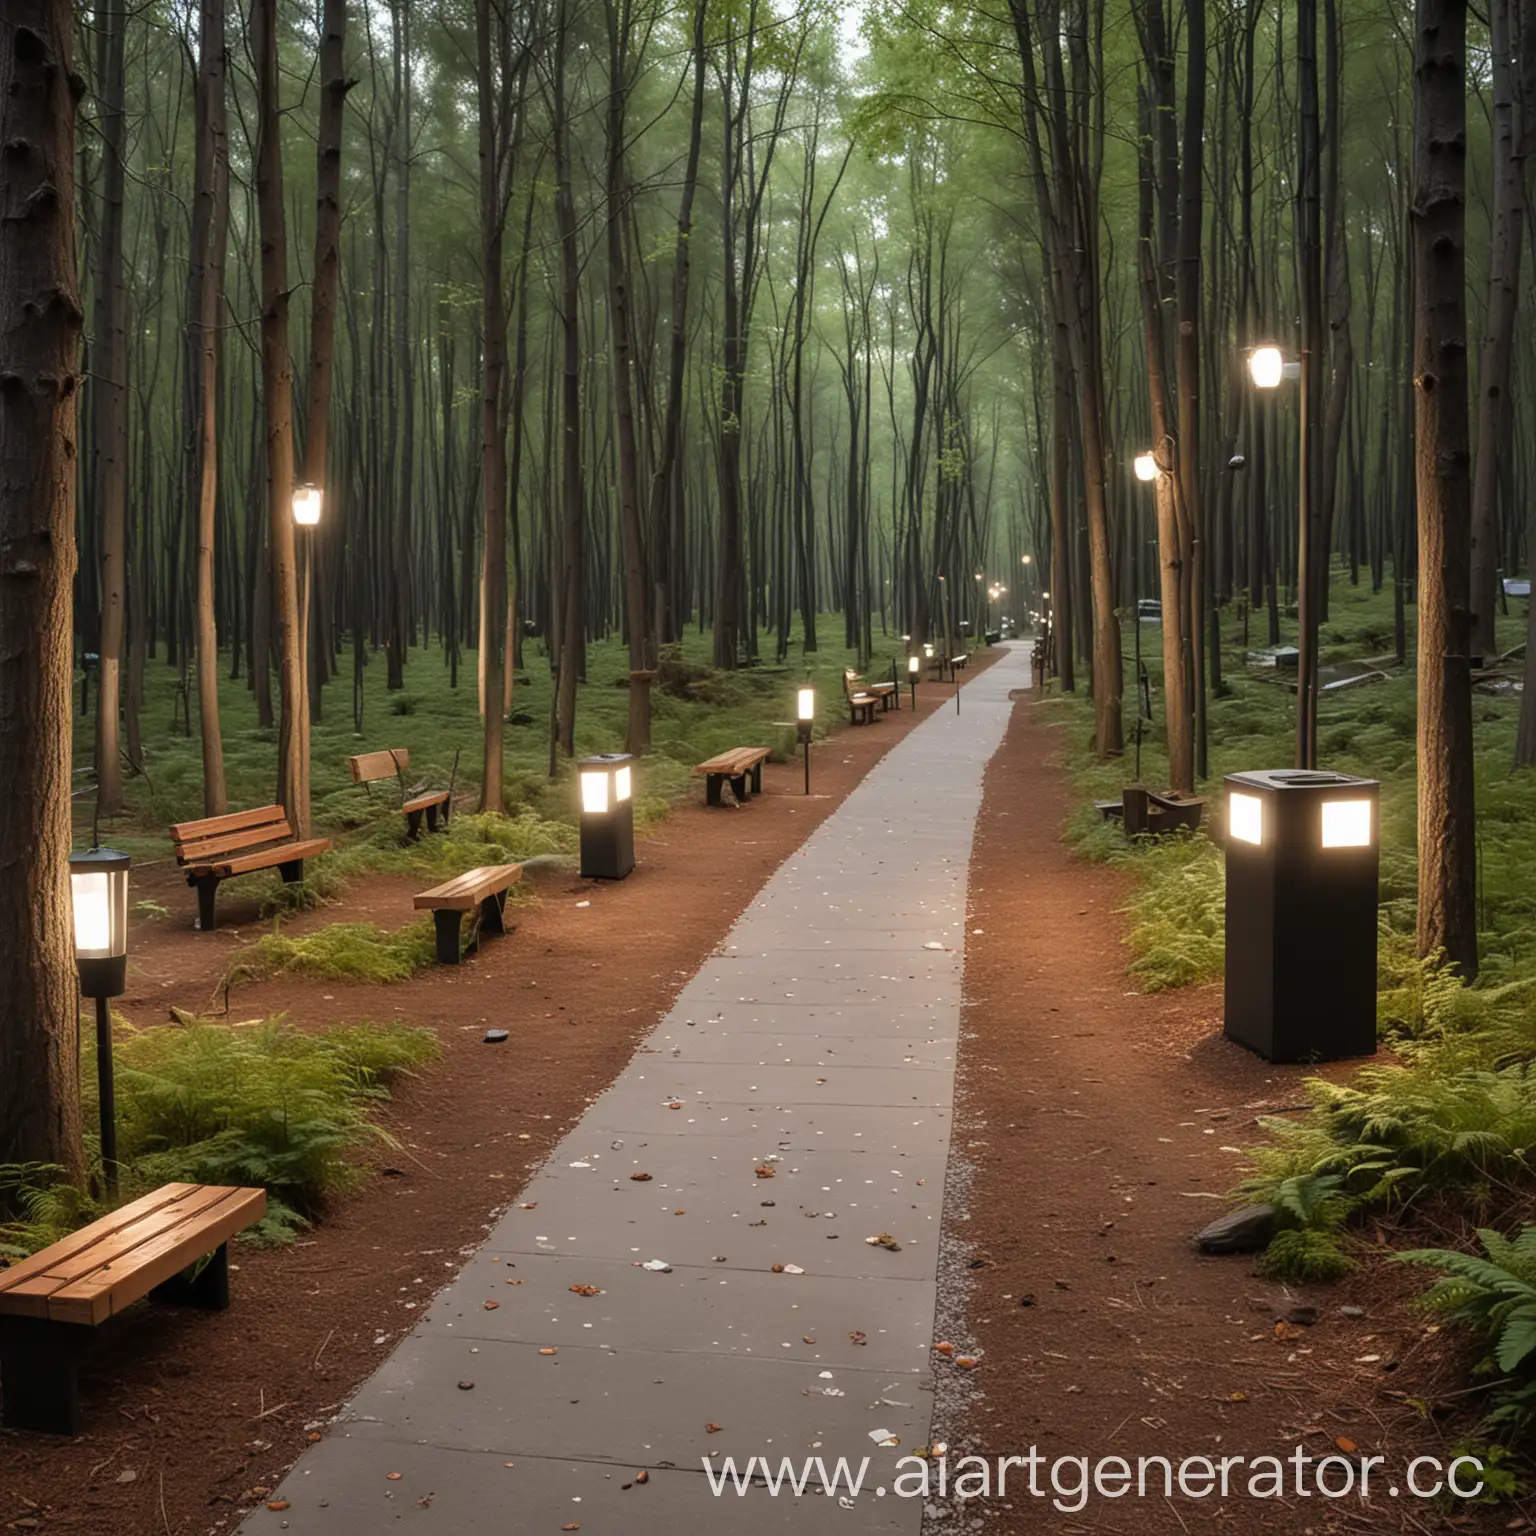 Modern-Forest-Trail-Design-with-Lanterns-Benches-and-Surveillance-Cameras